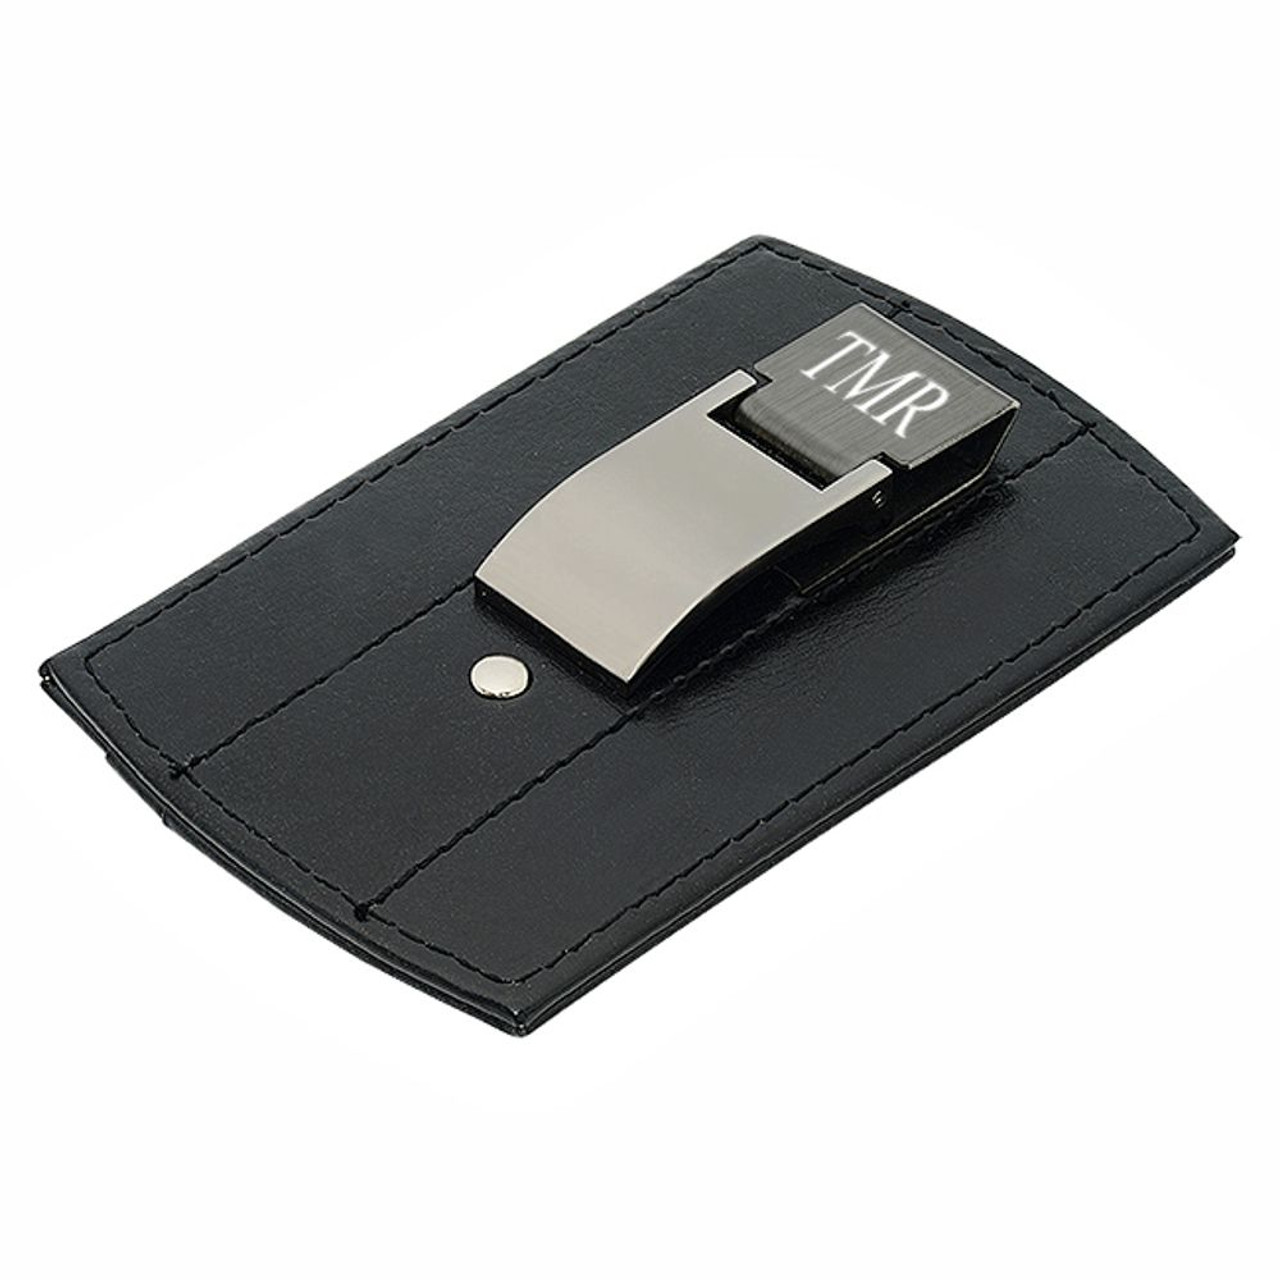 card and money clip